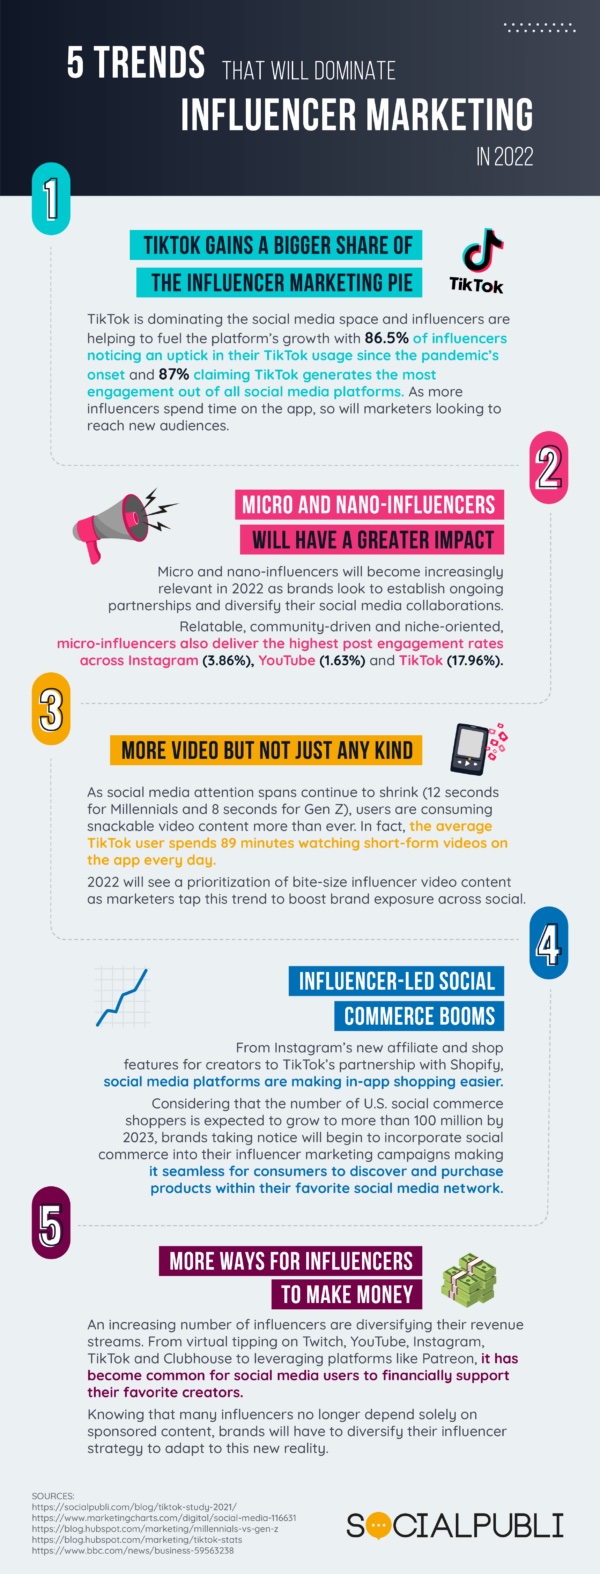 5 influencer marketing trends for 2022 infographic